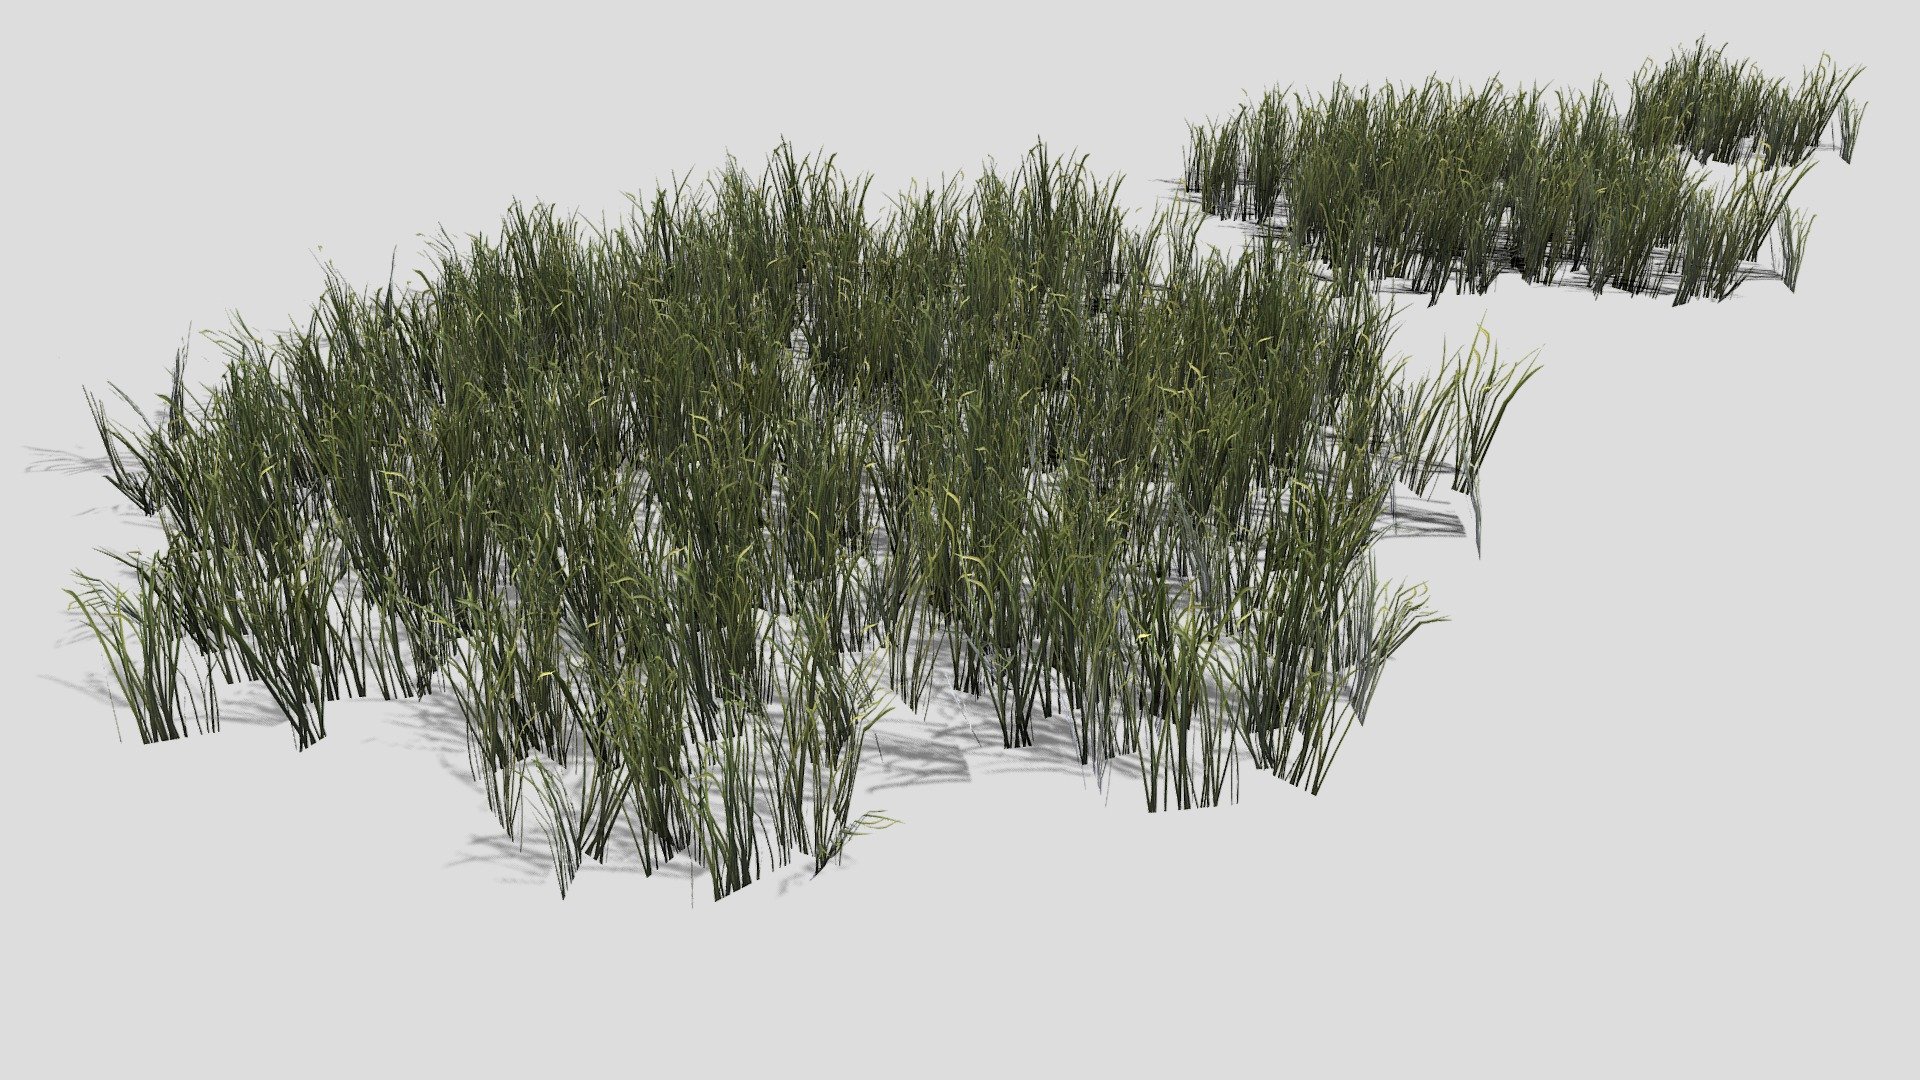 Low poly model of 3 variations of swamp grass.  Good for covering large areas of terrain

More examples of rendered foliage can be seen here:  https://www.artstation.com/leonlabyk - S Swamp Grass Patch - Buy Royalty Free 3D model by studio lab (@leonlabyk) 3d model